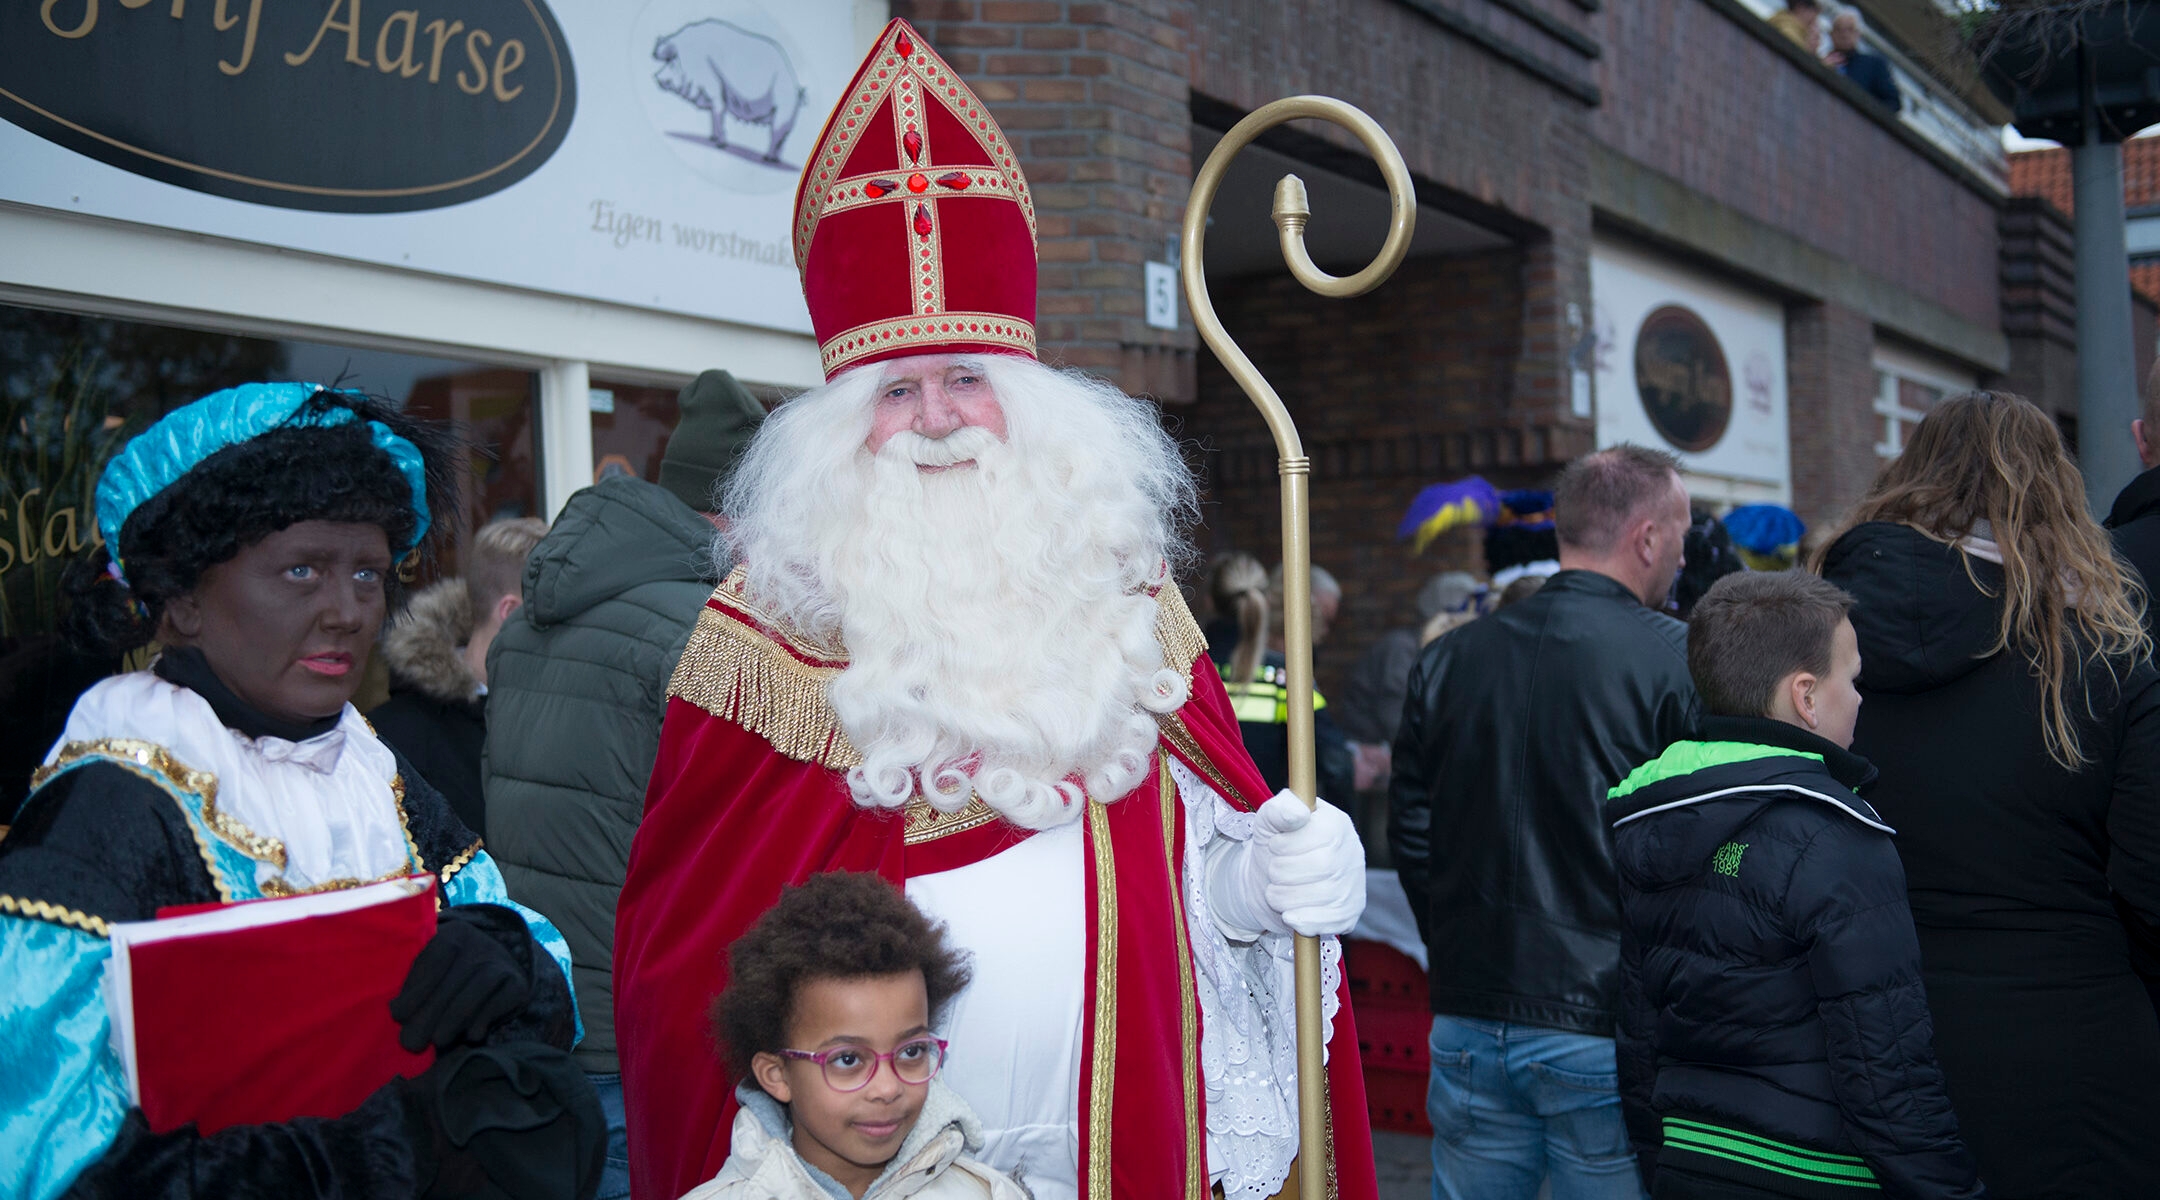 A child poses for a photo with a woman dressed as Black Pete and a man portraying Saint Nicholas in northern Amsterdam, the Netherlands on Nov. 16, 2019. (Cnaan Liphshiz)